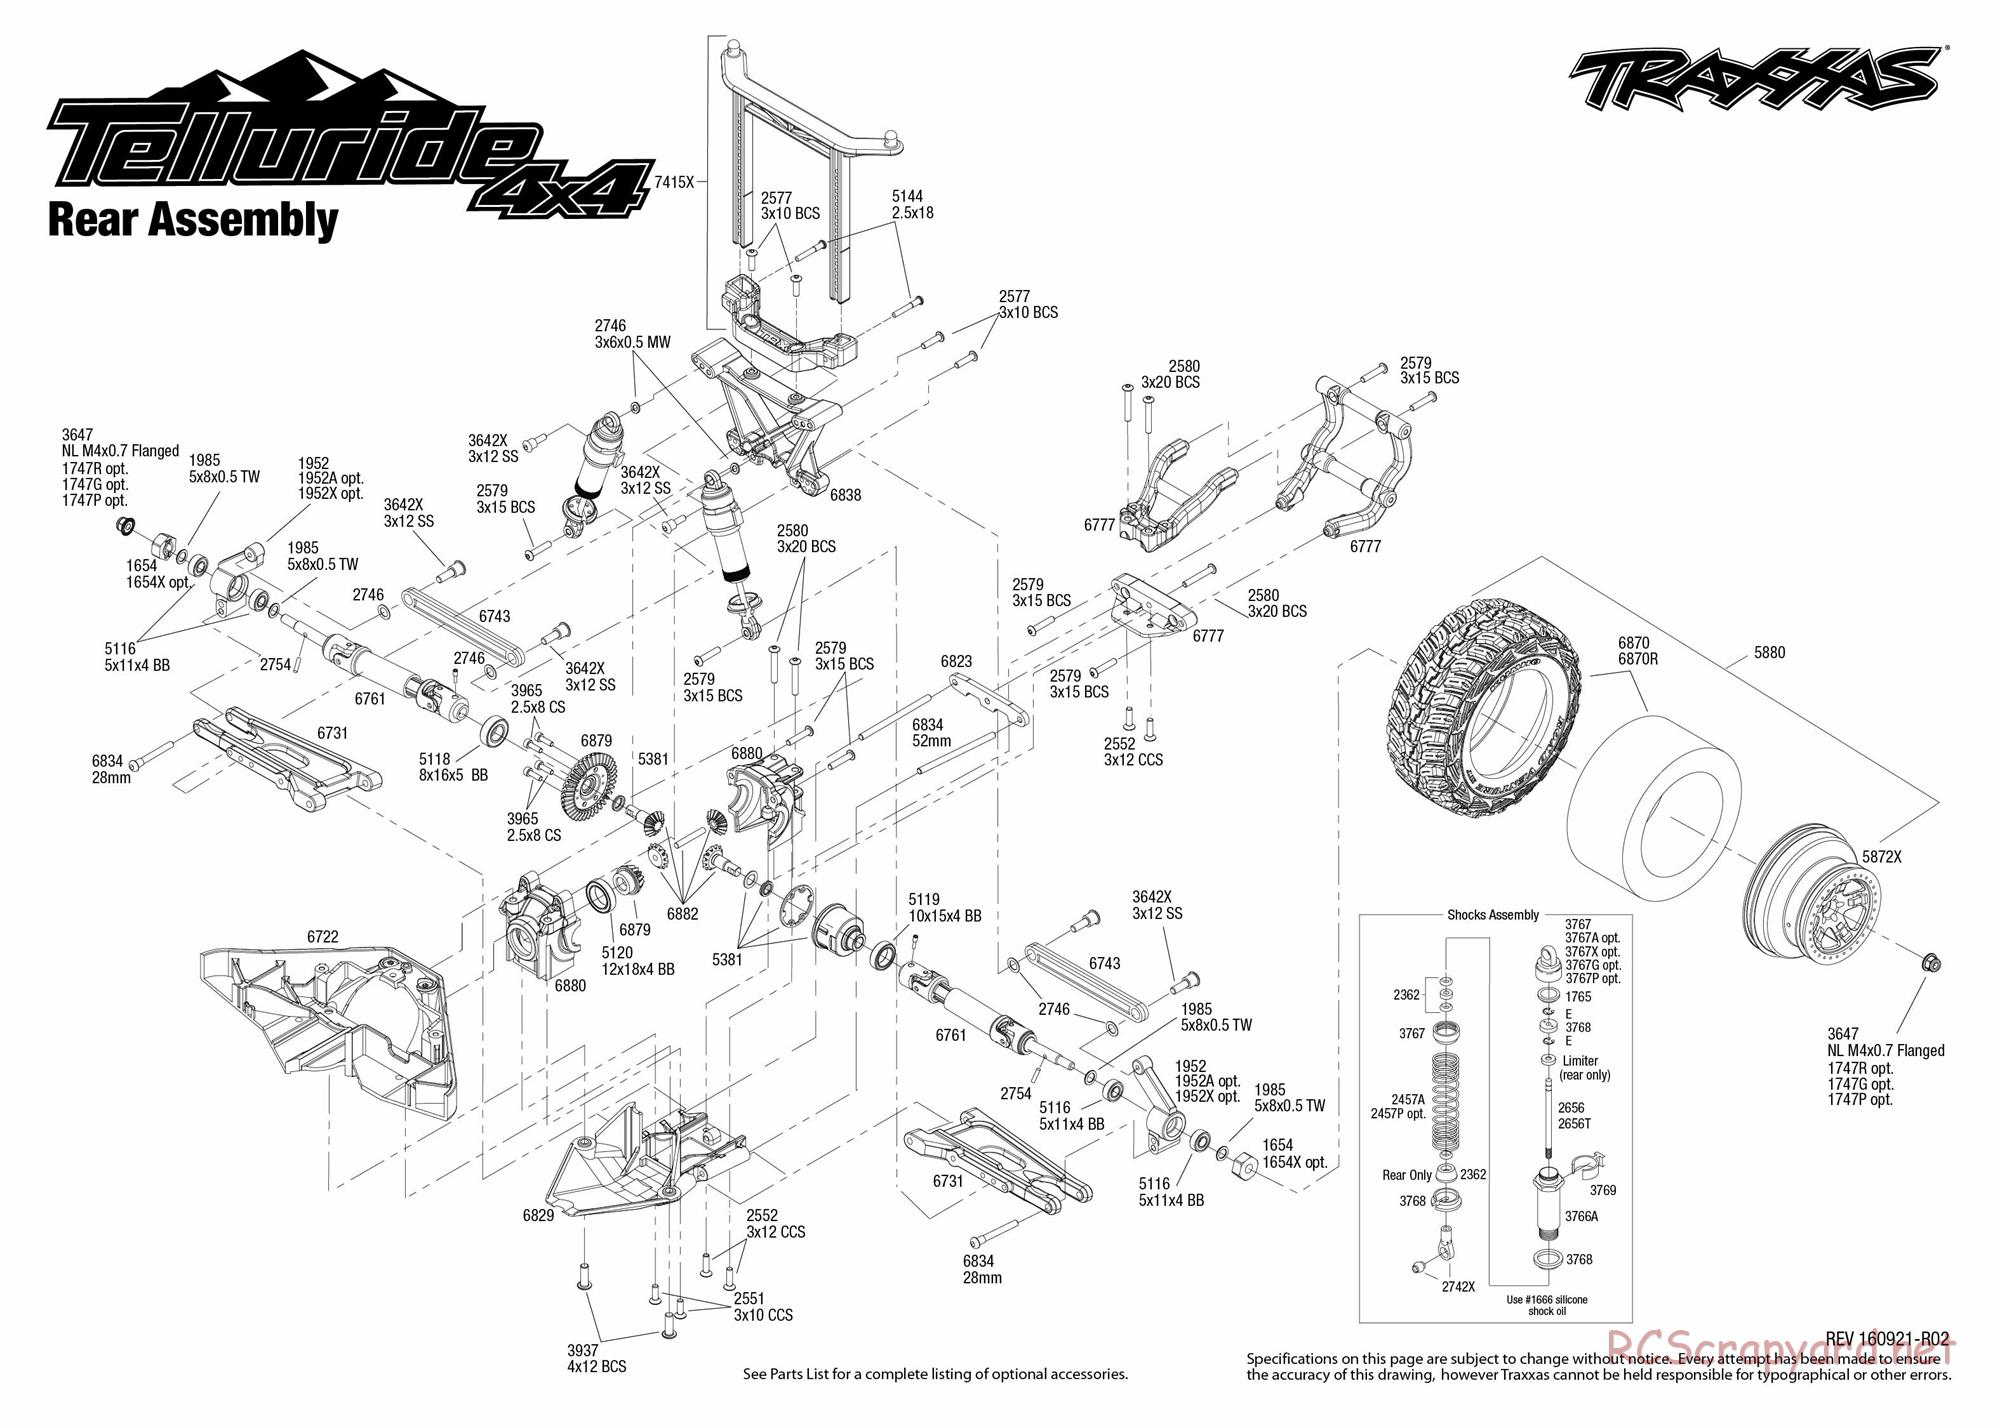 Traxxas - Telluride 4x4 (2015) - Exploded Views - Page 4